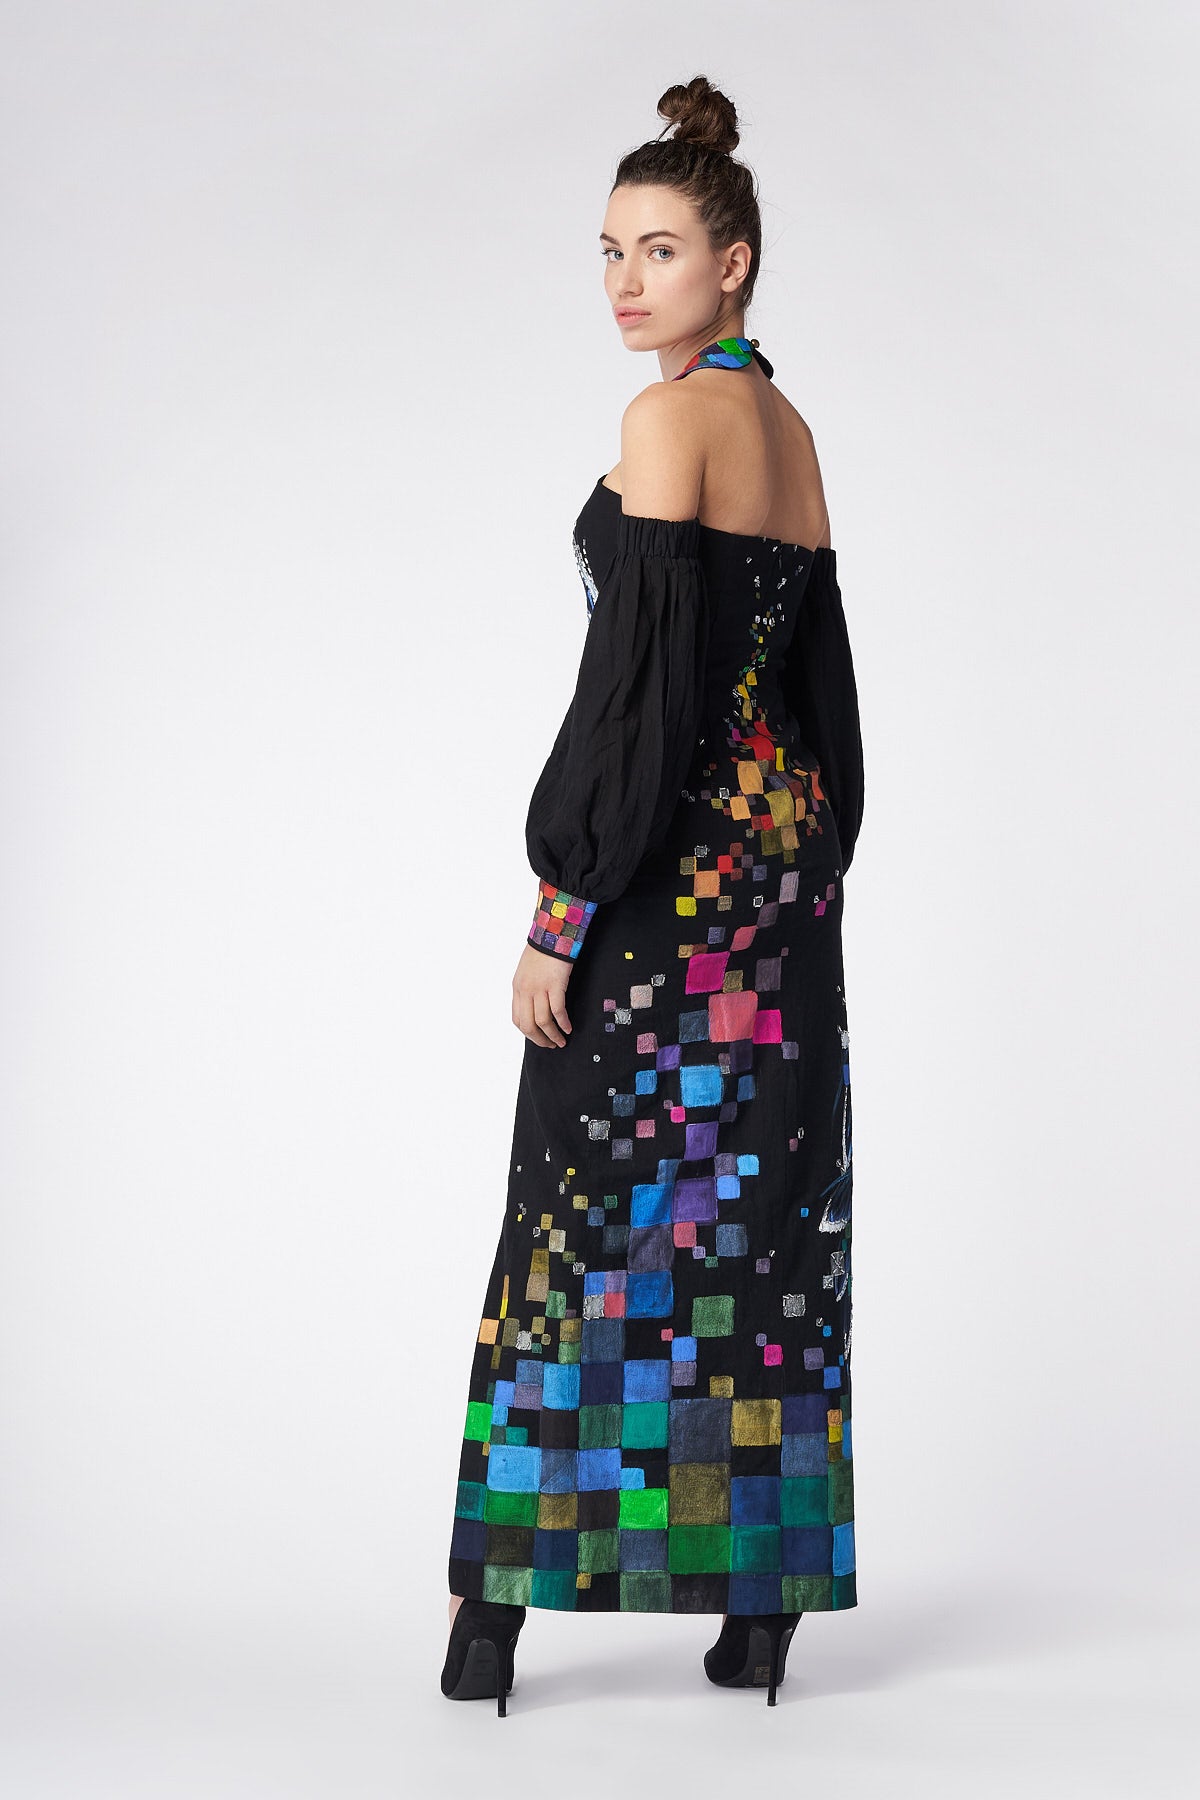 LONG HAND-PAINTED AND HAND-EMBROIDERED BACKLESS DRESS